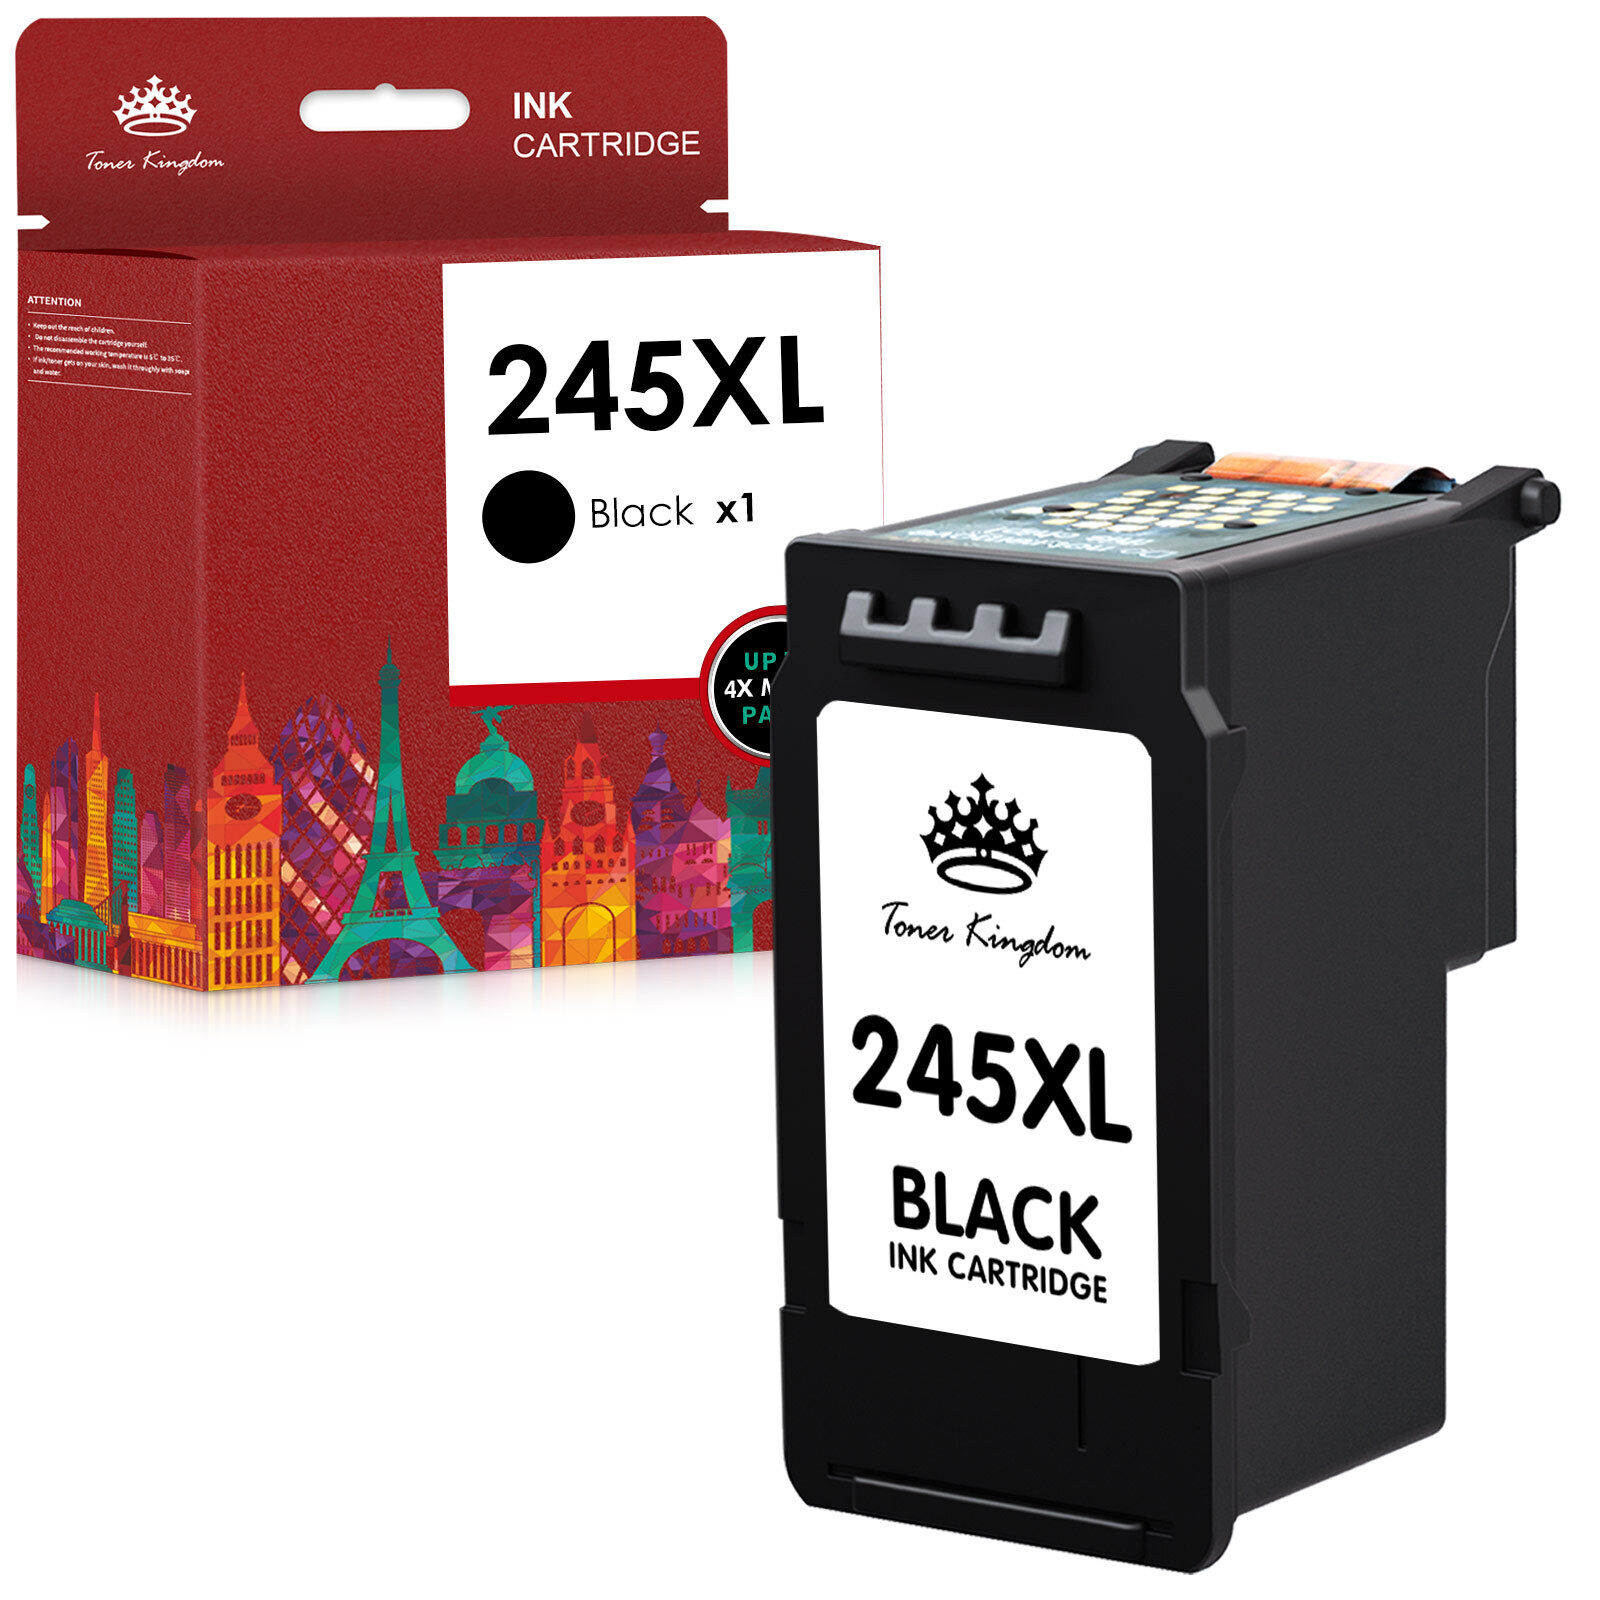 PG-245XL CL-246XL Ink Cartridge replacement for Canon MG2420 MG2520 MG2522 2525